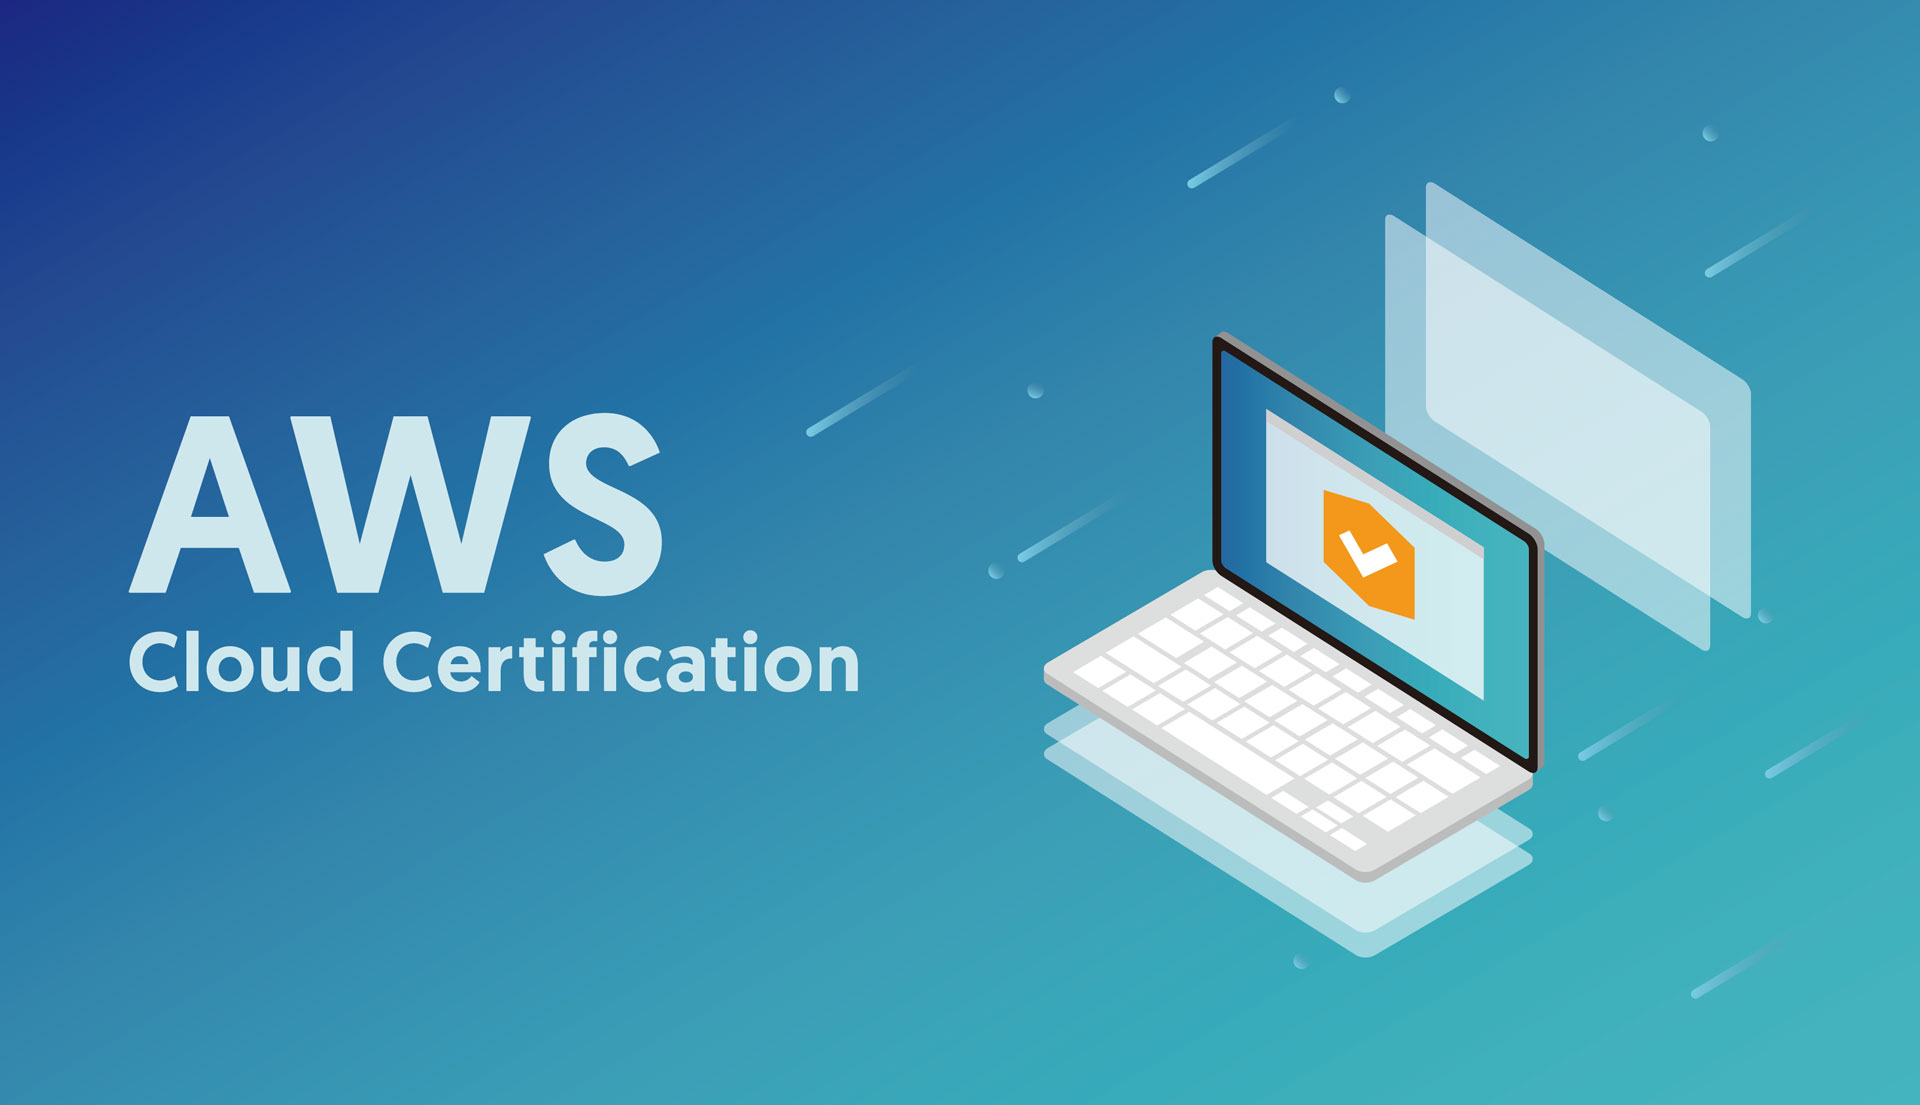 How to Achieve the AWS Cloud Certification Easily?